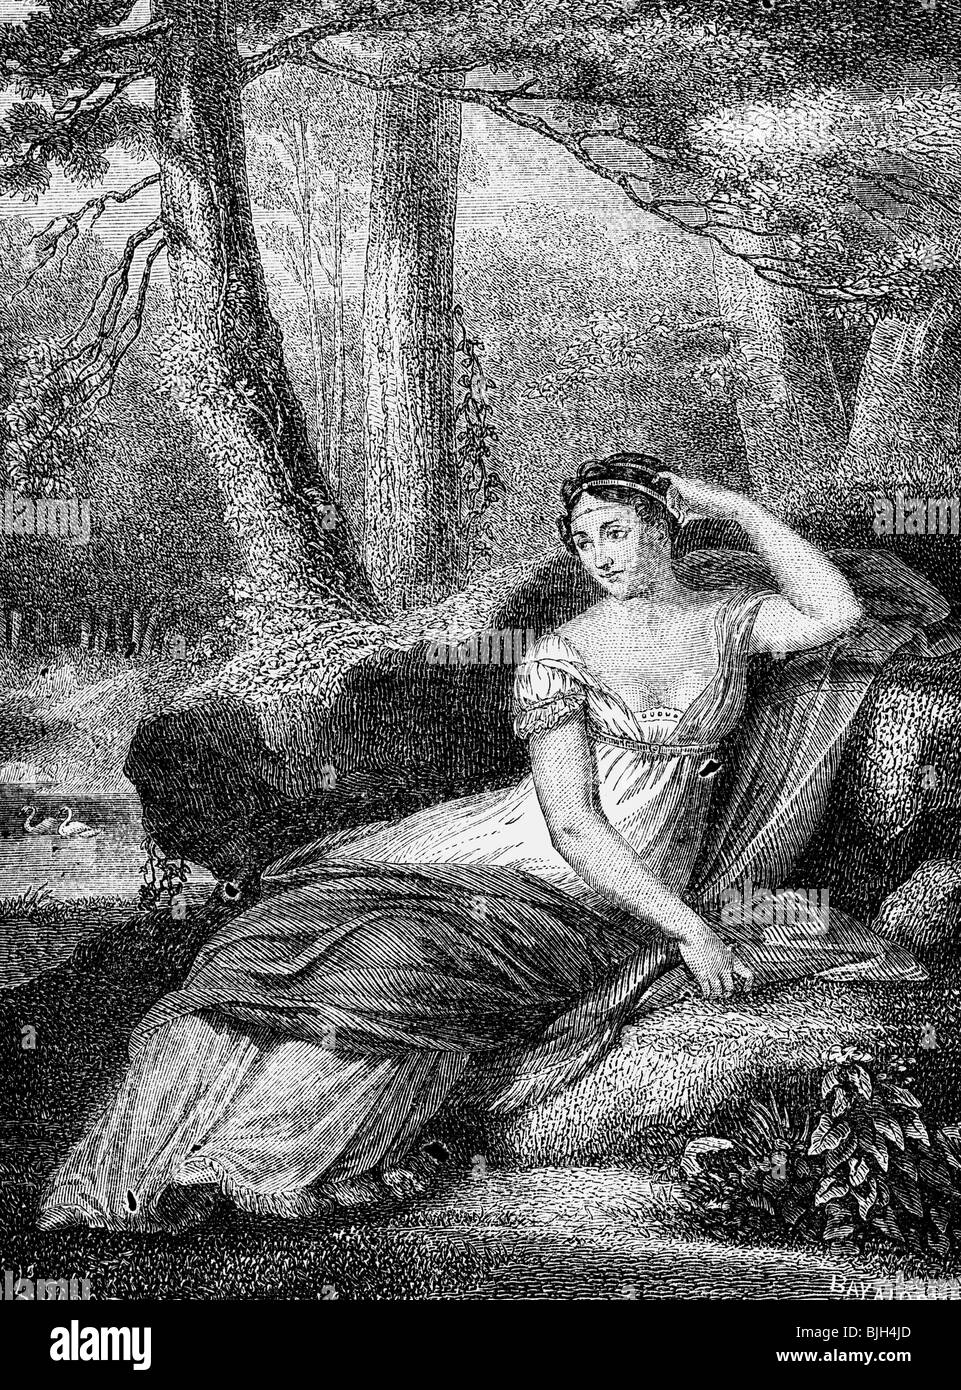 Beauharnais, Josephine de, 23.6.1763 - 29.5.1814, Empress of the French 2.12.1804 - 10.1.1810, full length, wood engraving, 19th century,   , Stock Photo